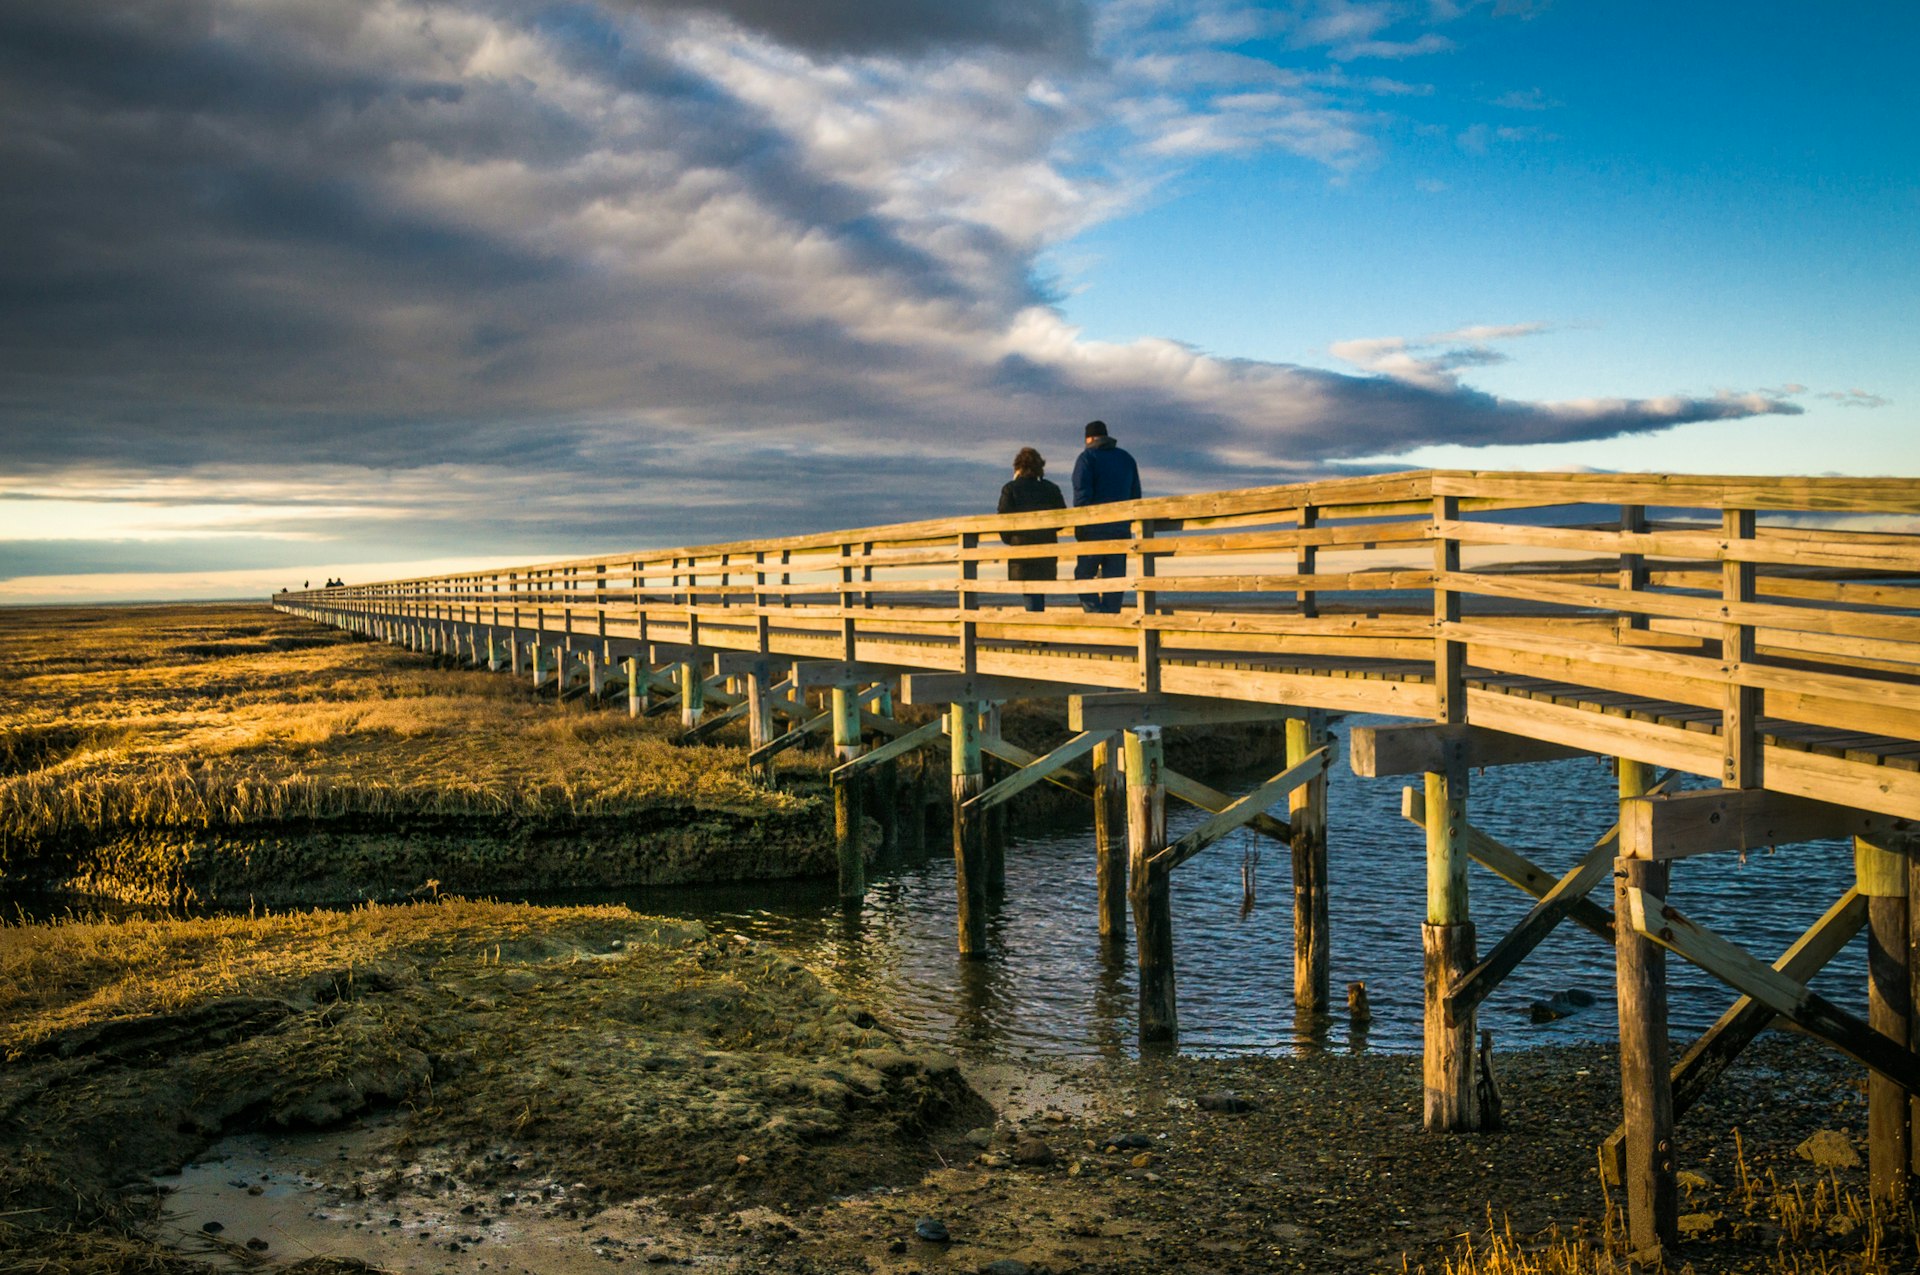 A couple walk along a boardwalk on a winter's day with the sun low in the sky